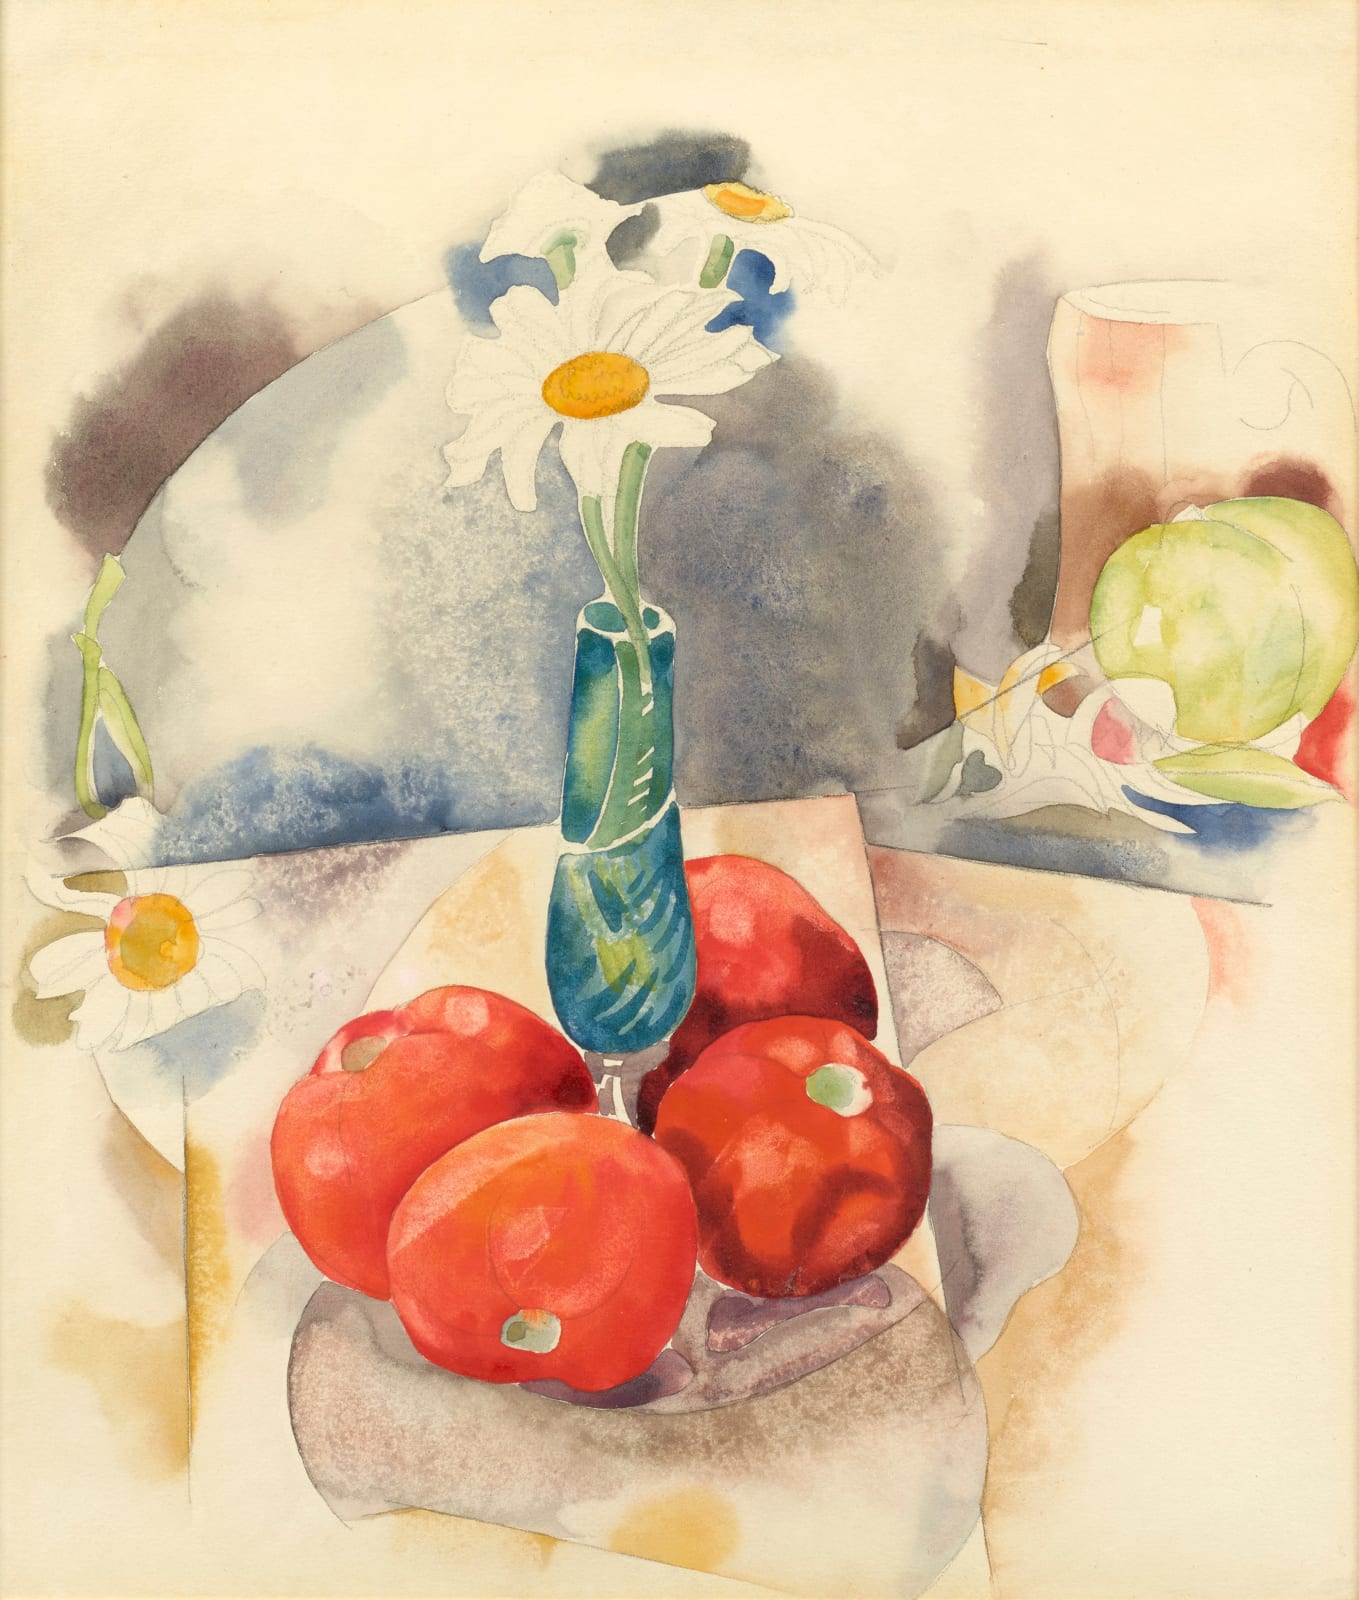 Charles Demuth, Daisies and Tomatoes, 1925